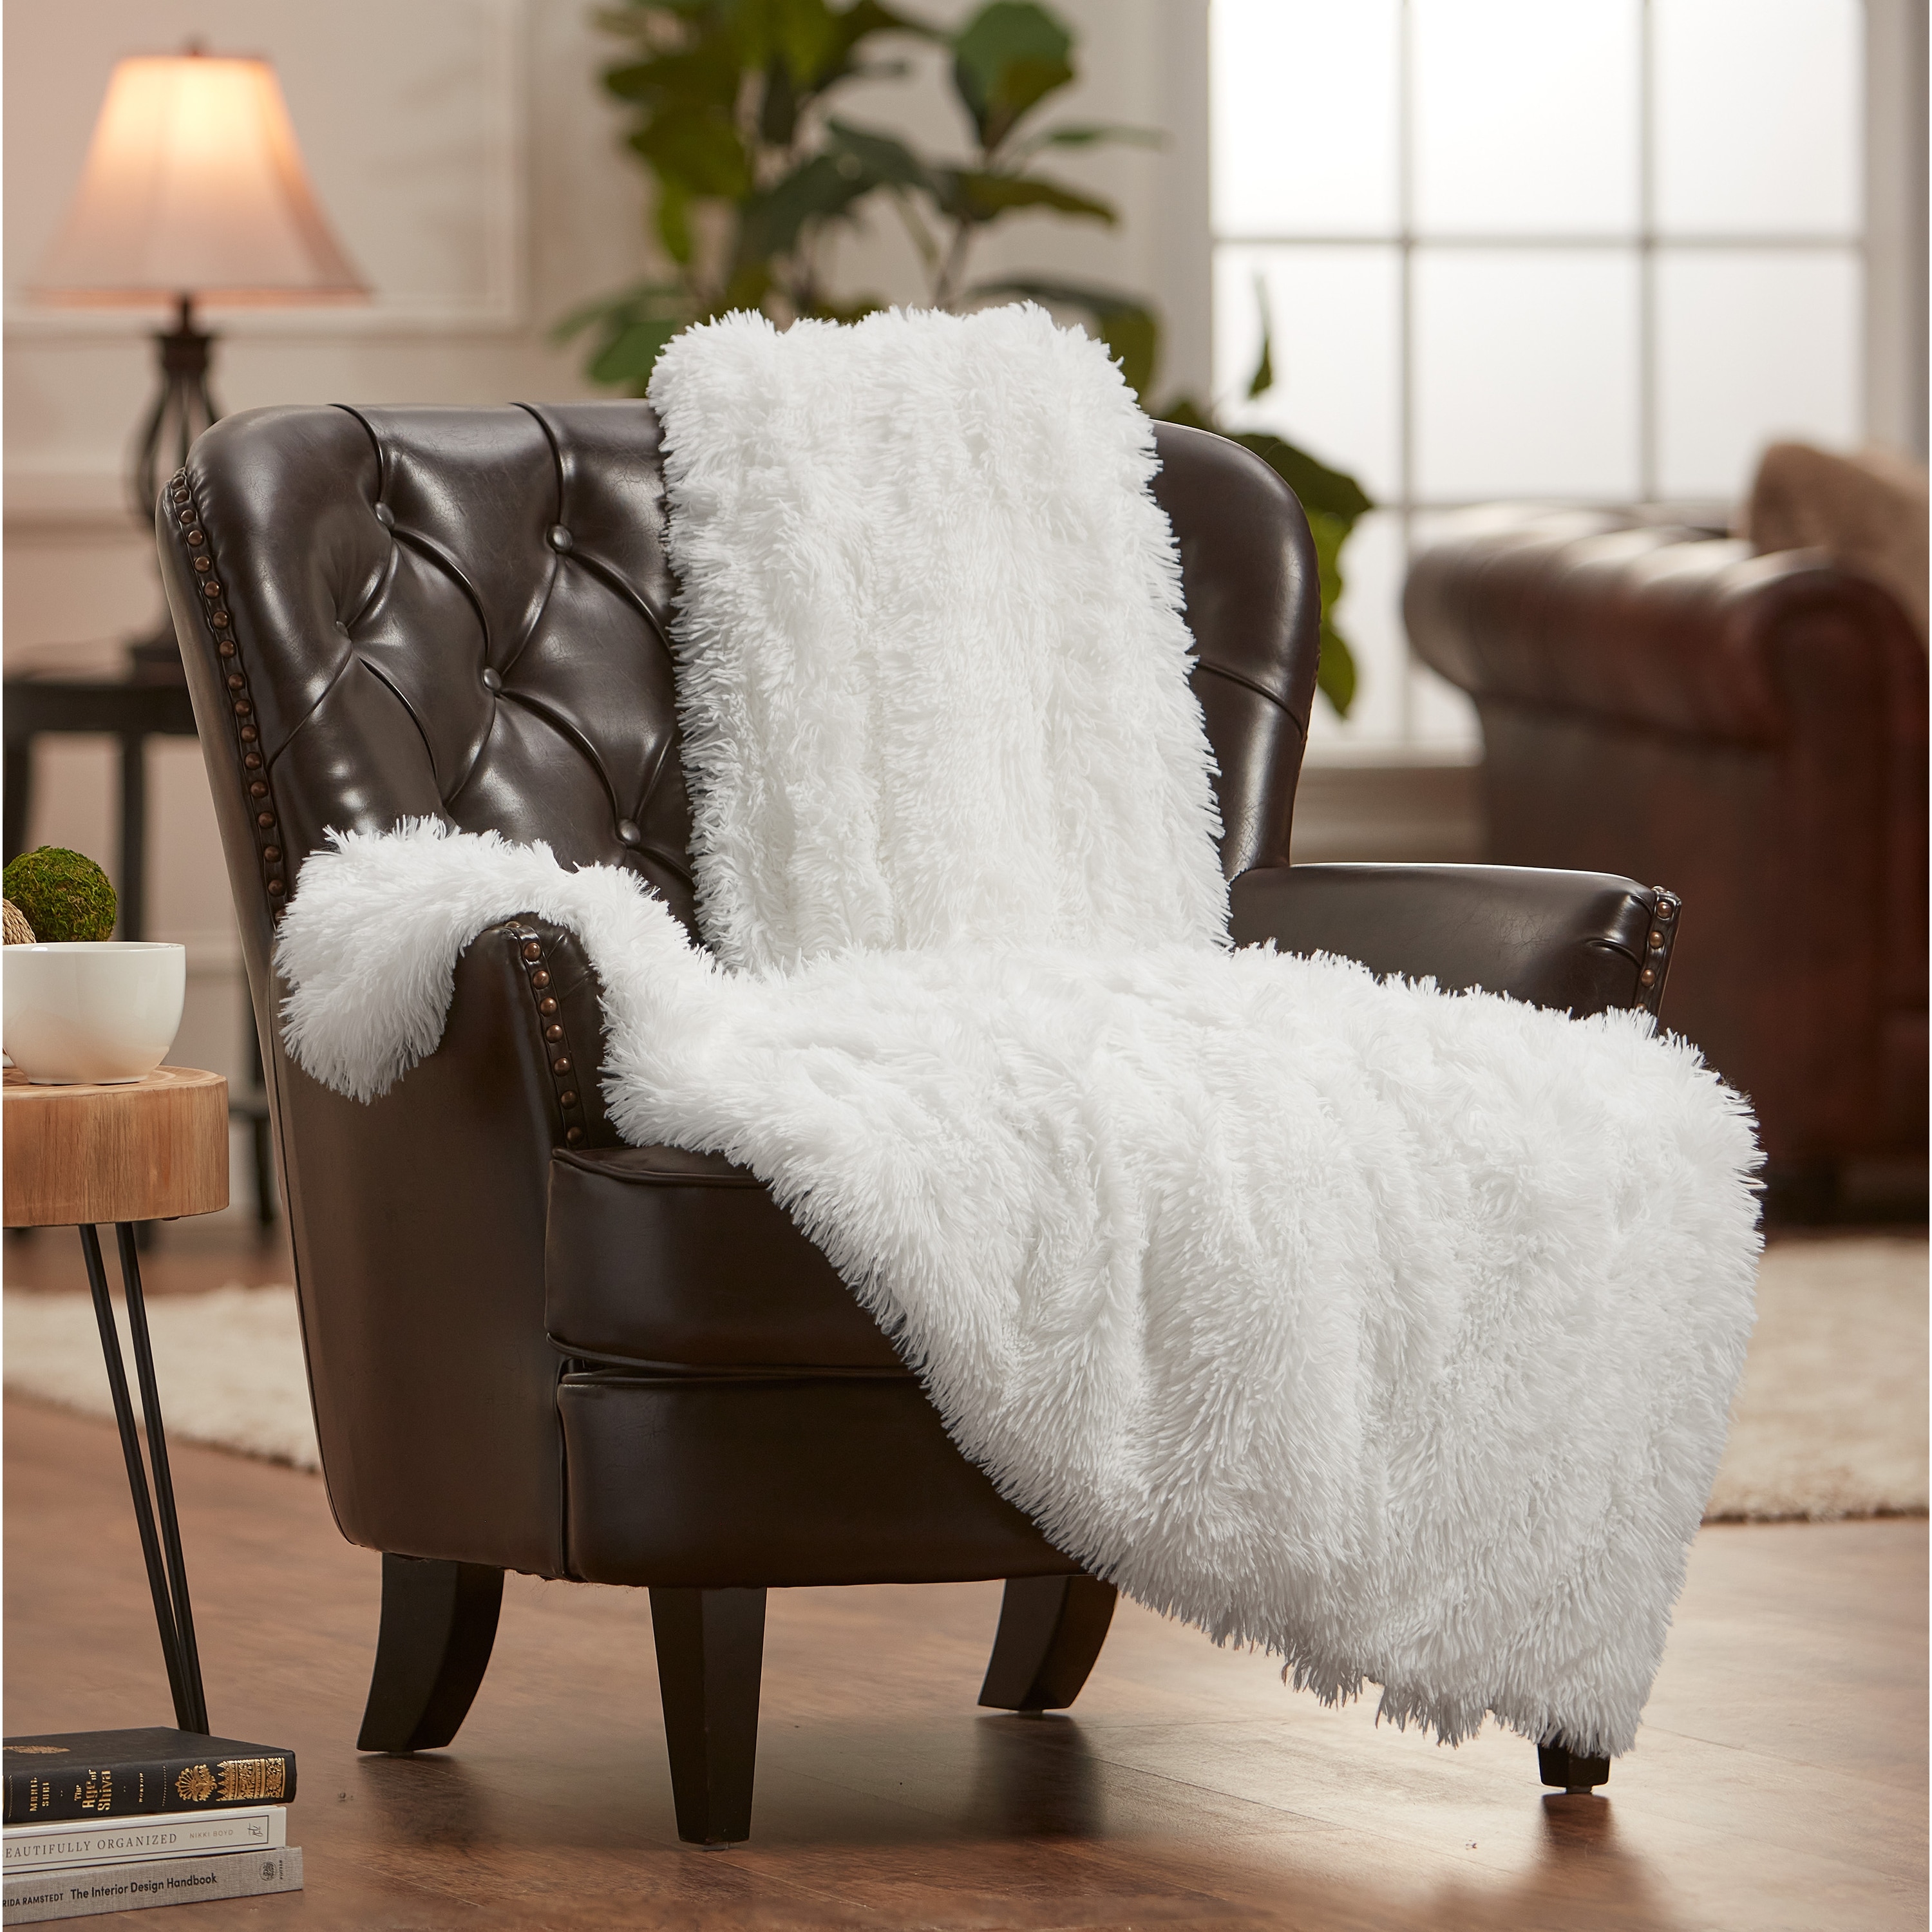 Decorative Extra Soft Faux Fur Blanket Queen Size 78 x 90,Solid